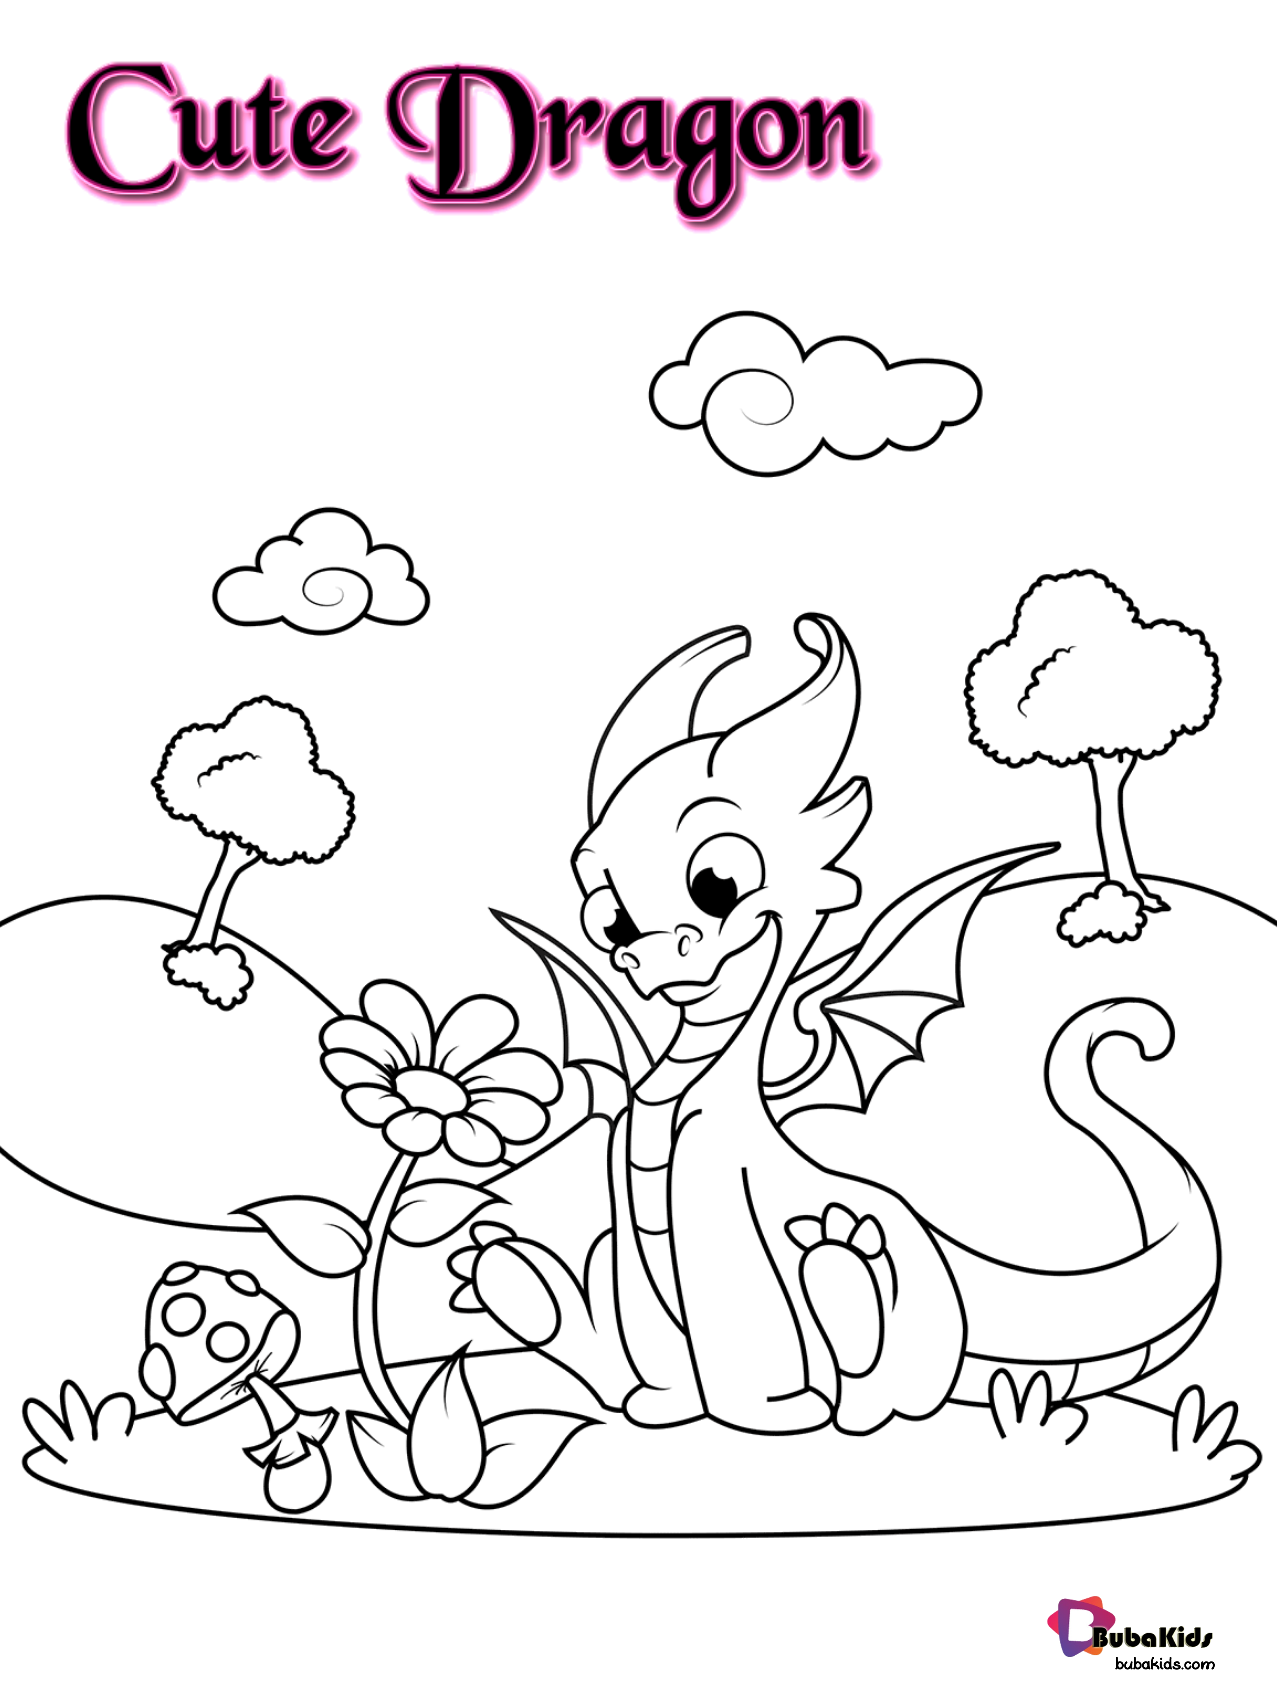 Free and printable cute dragon and flower coloring page